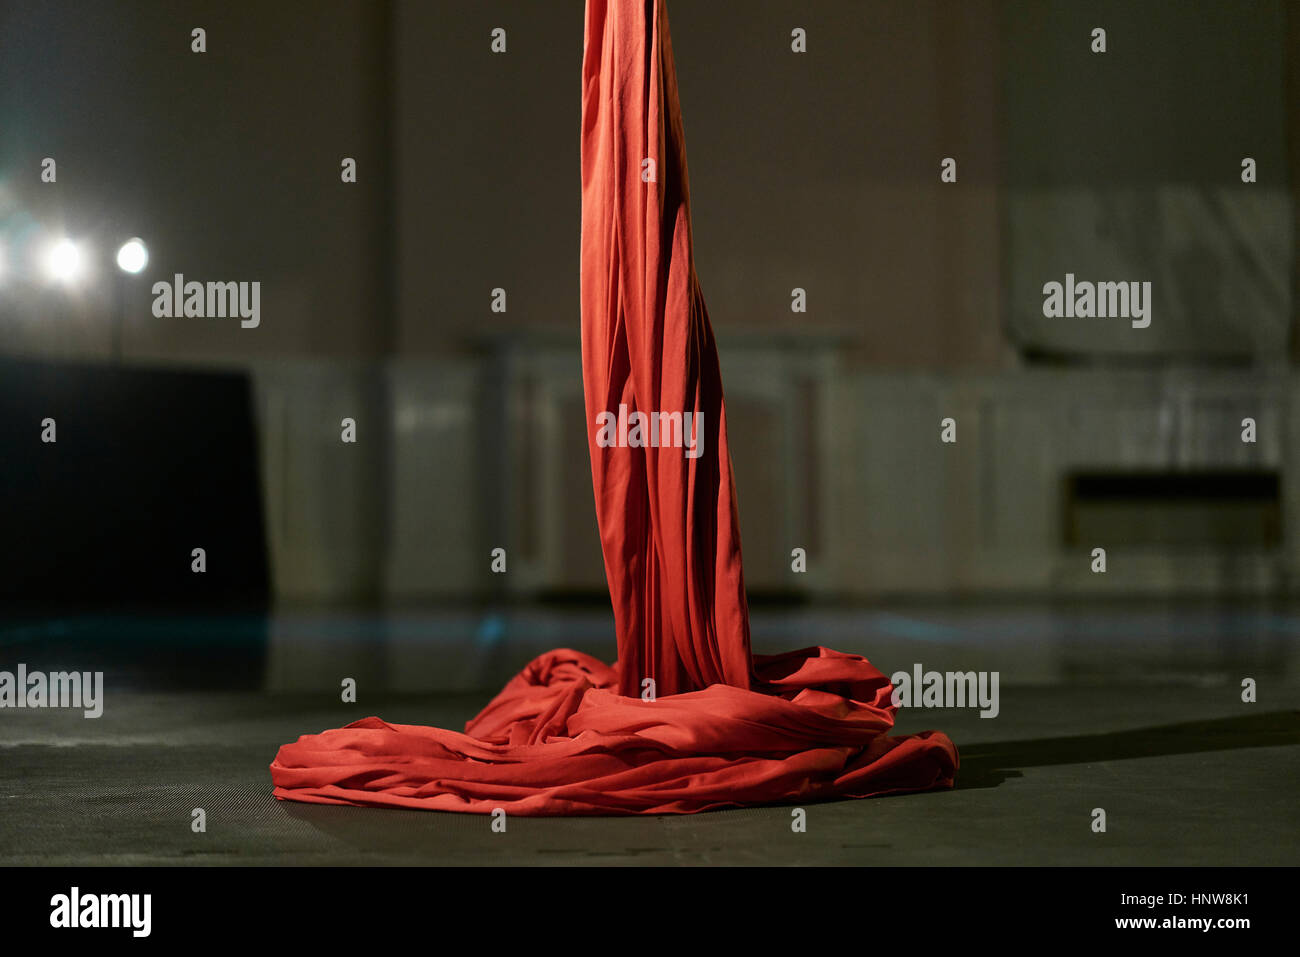 Red silk rope used for aerial acrobatics Stock Photo